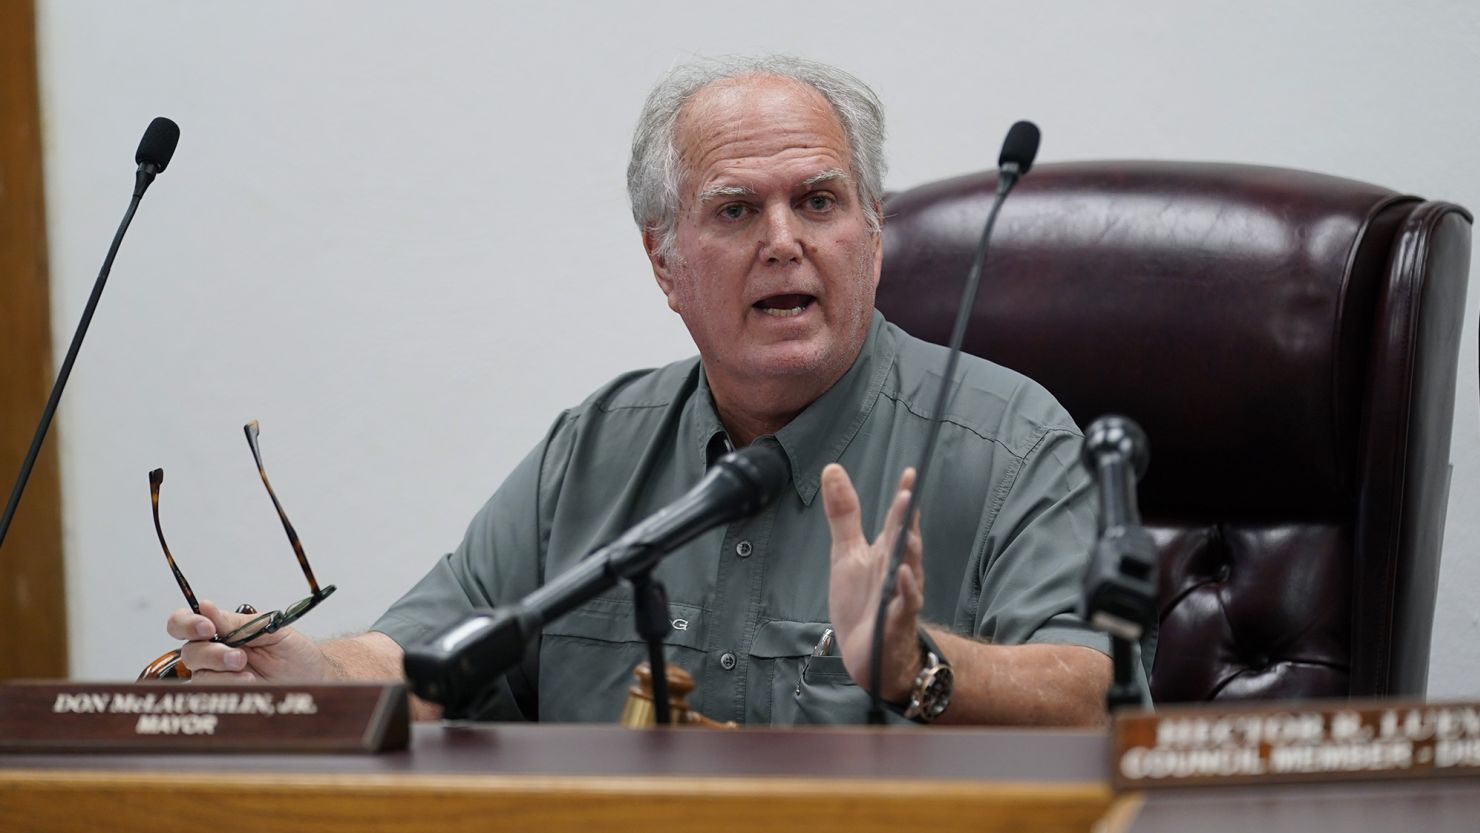 Uvalde Mayor Don McLaughlin speaks during a special emergency city council meeting on June 7, 2022, in Uvalde, Texas.